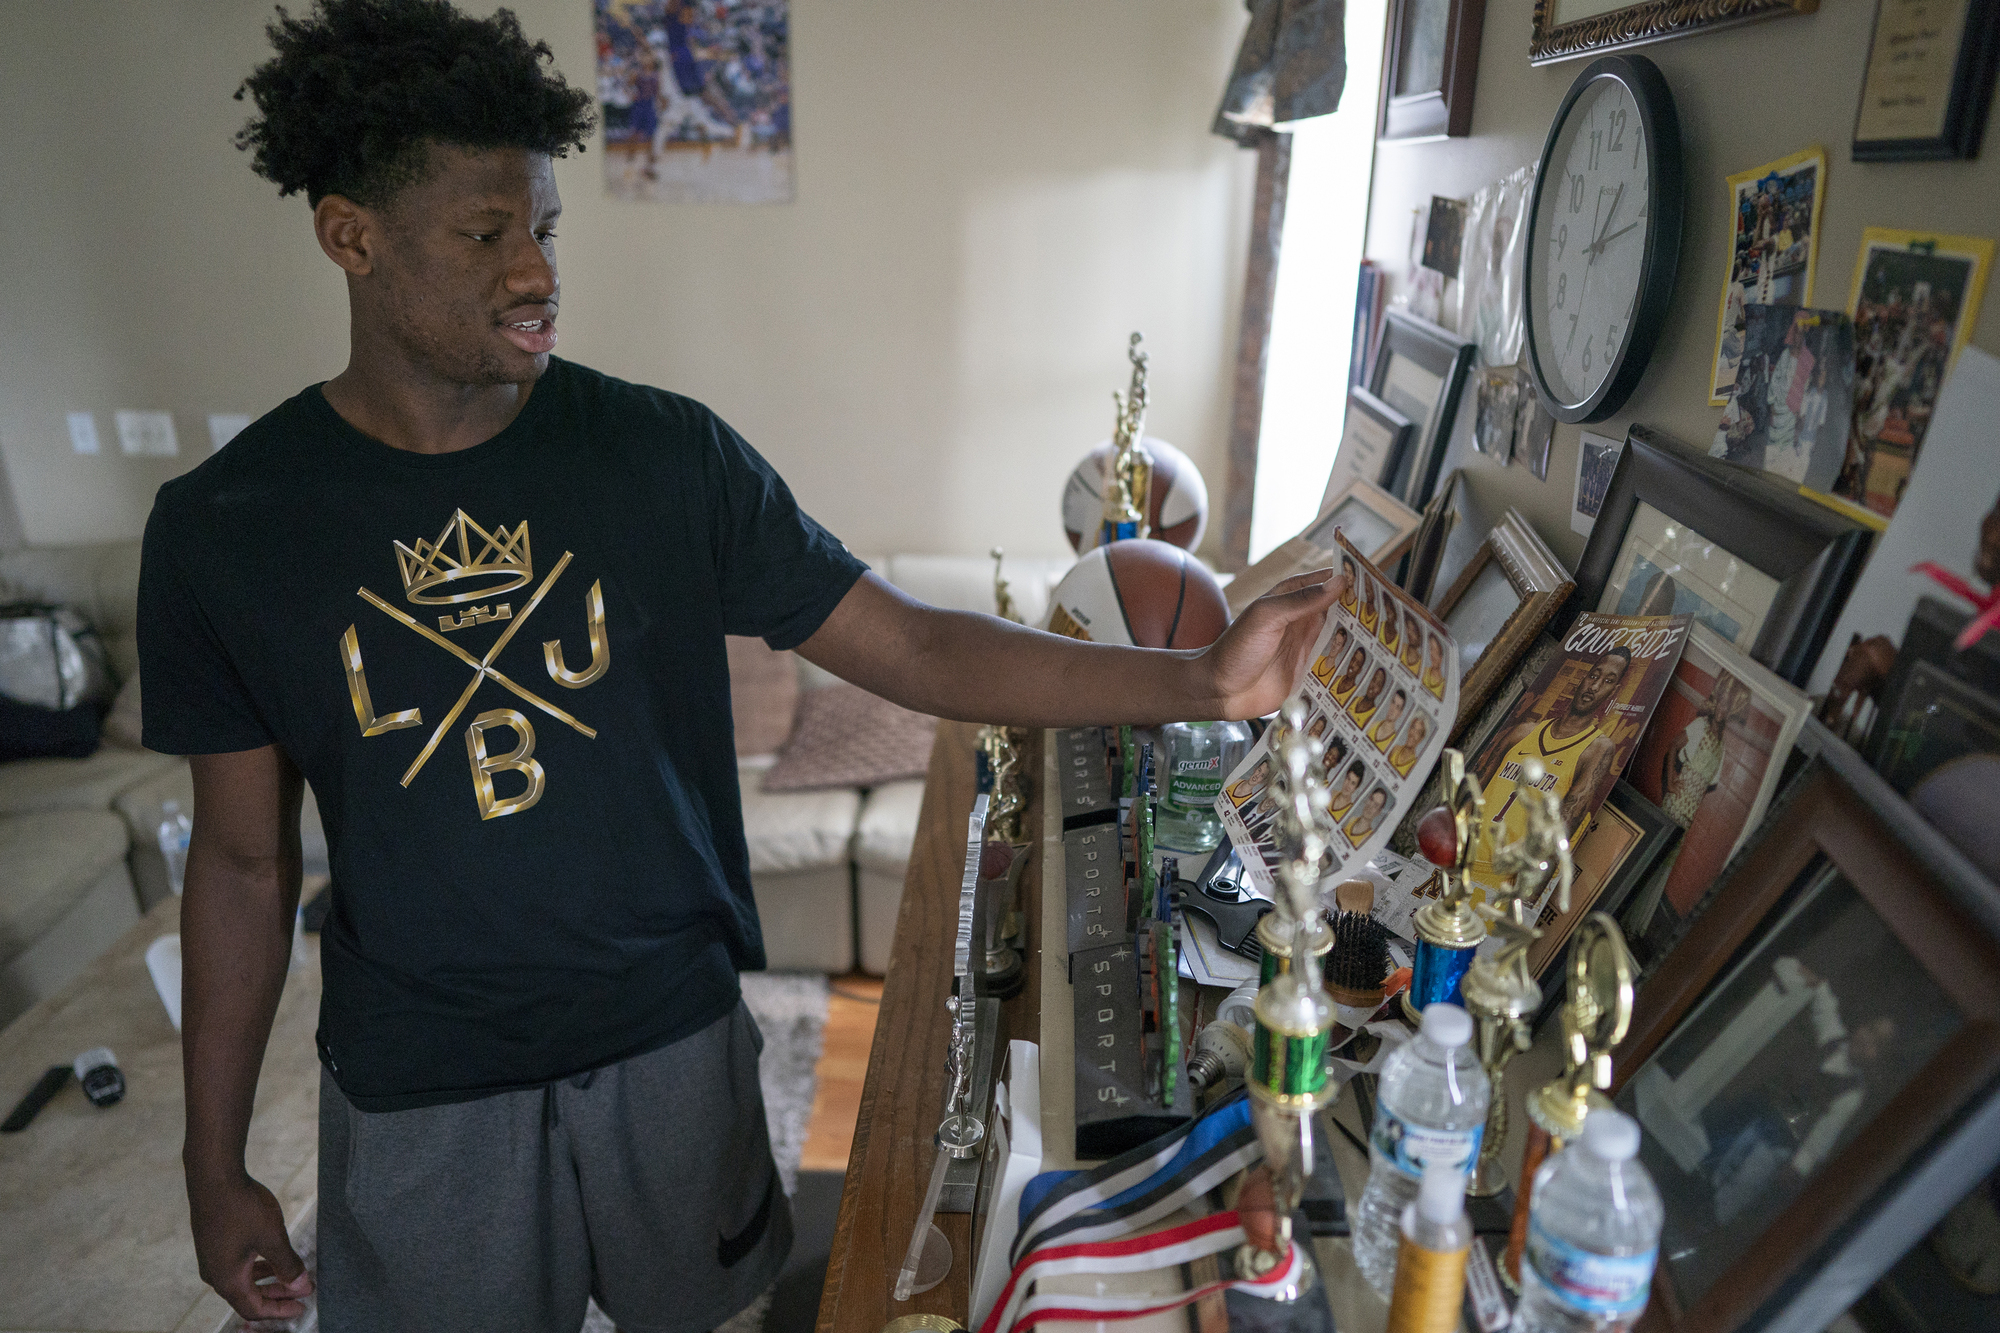 Daniel Oturu at his home in Woodbury looking at his many trophies and awards.